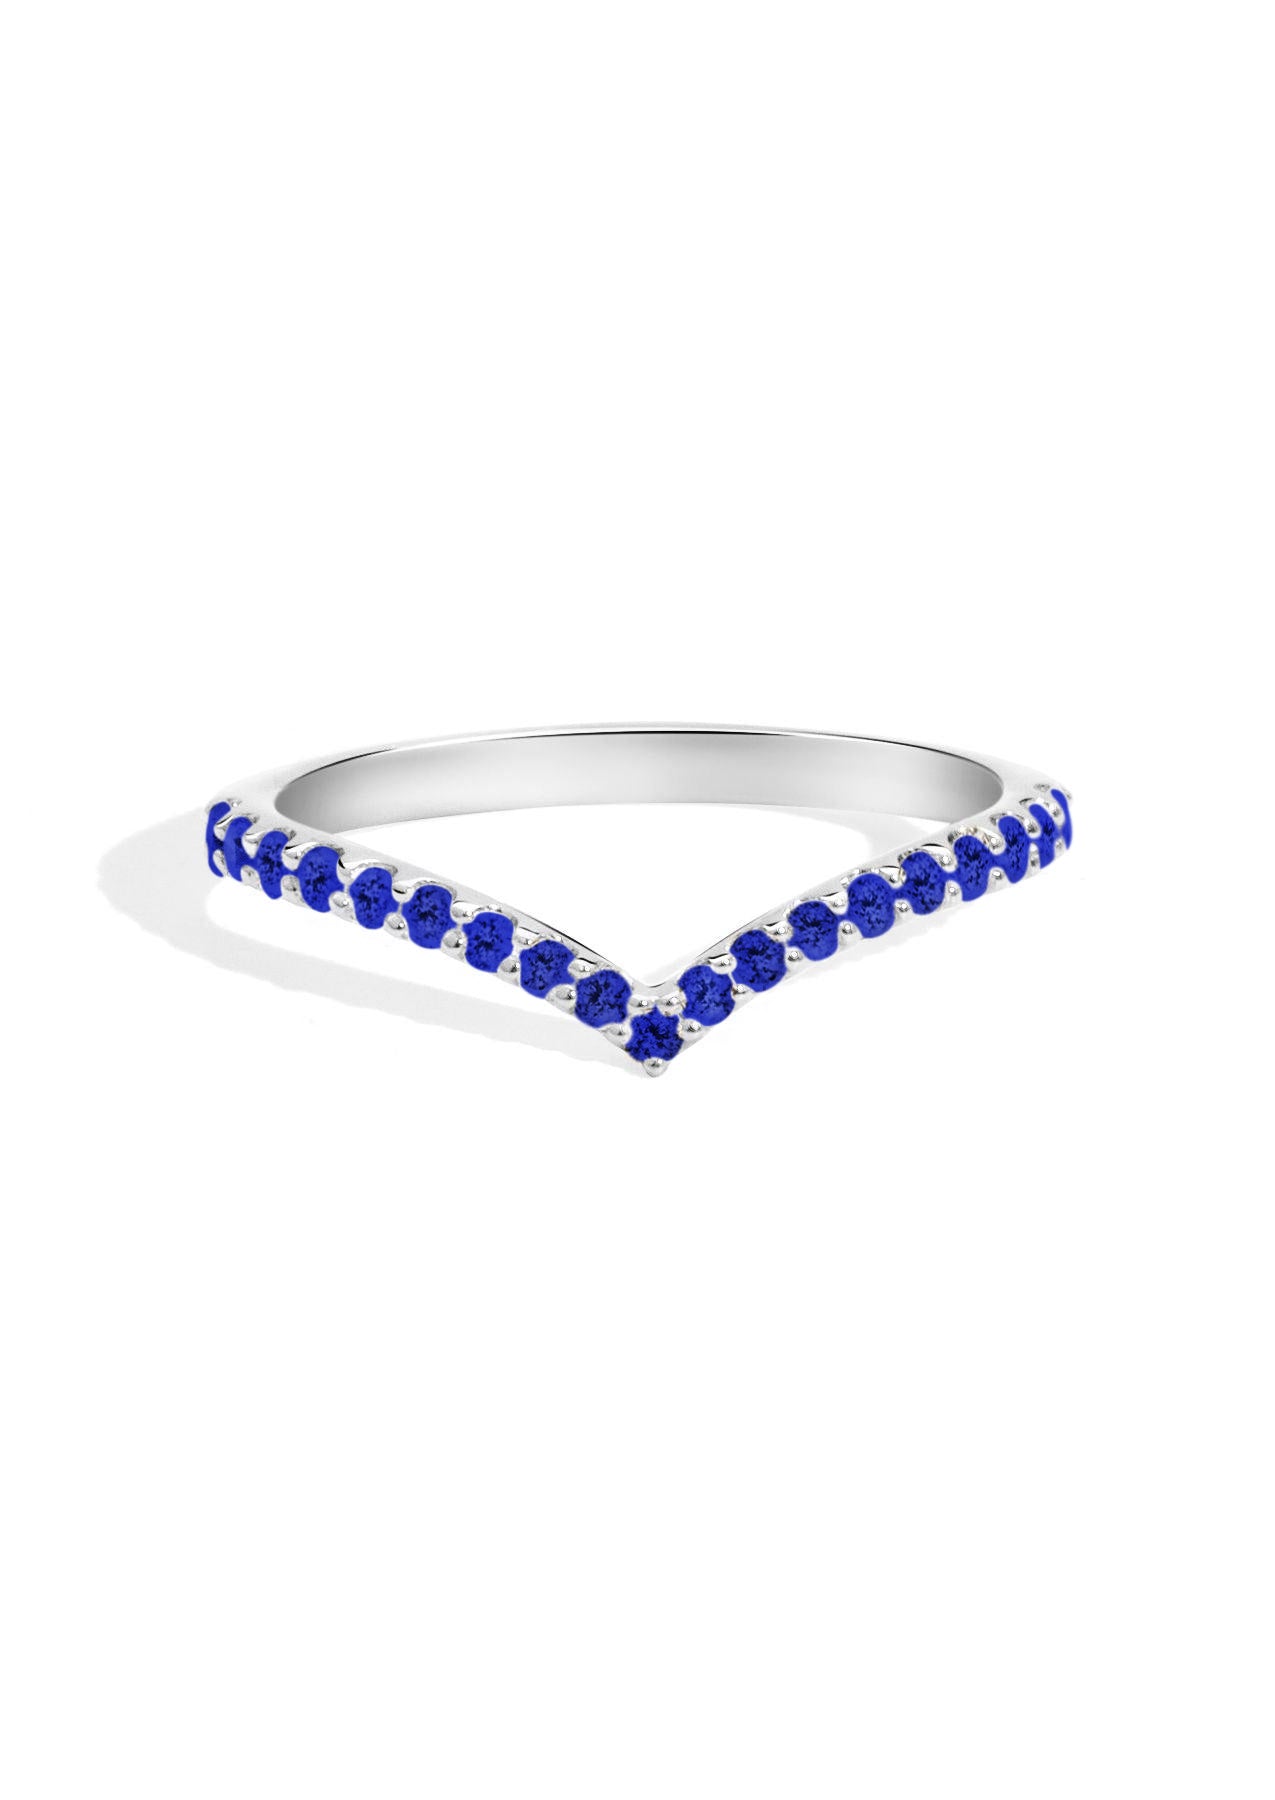 The Allude Platinum Sapphire Band